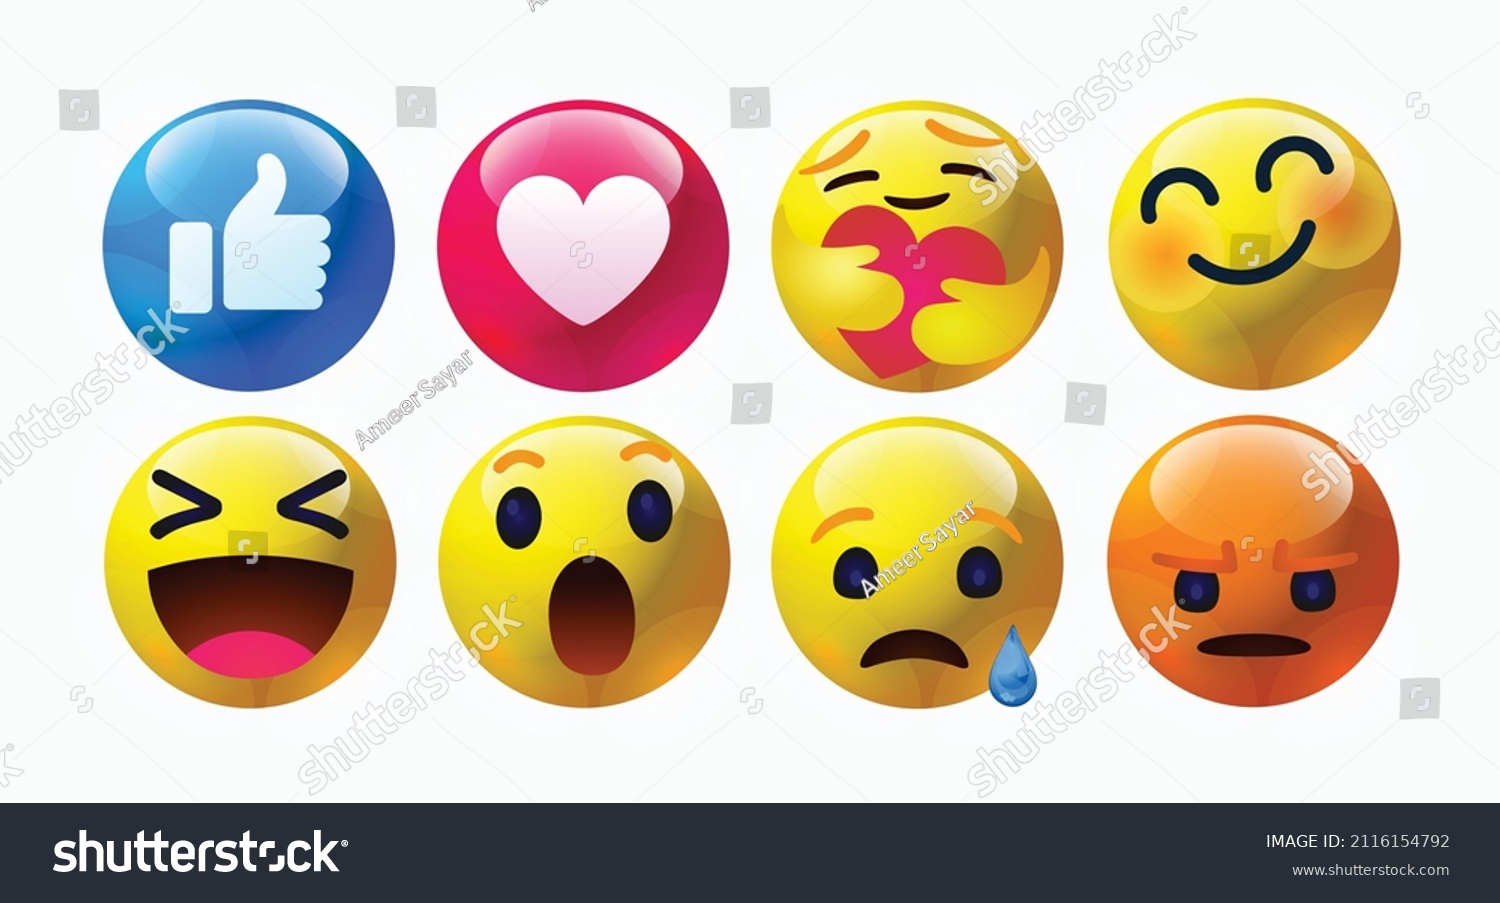 SVG of Emoticons comment social media Facebook chat high quality vector 3d round yellow cartoon bubble comment reactions icon template face tear smile sad hug love like Lol laughter emoji character message svg